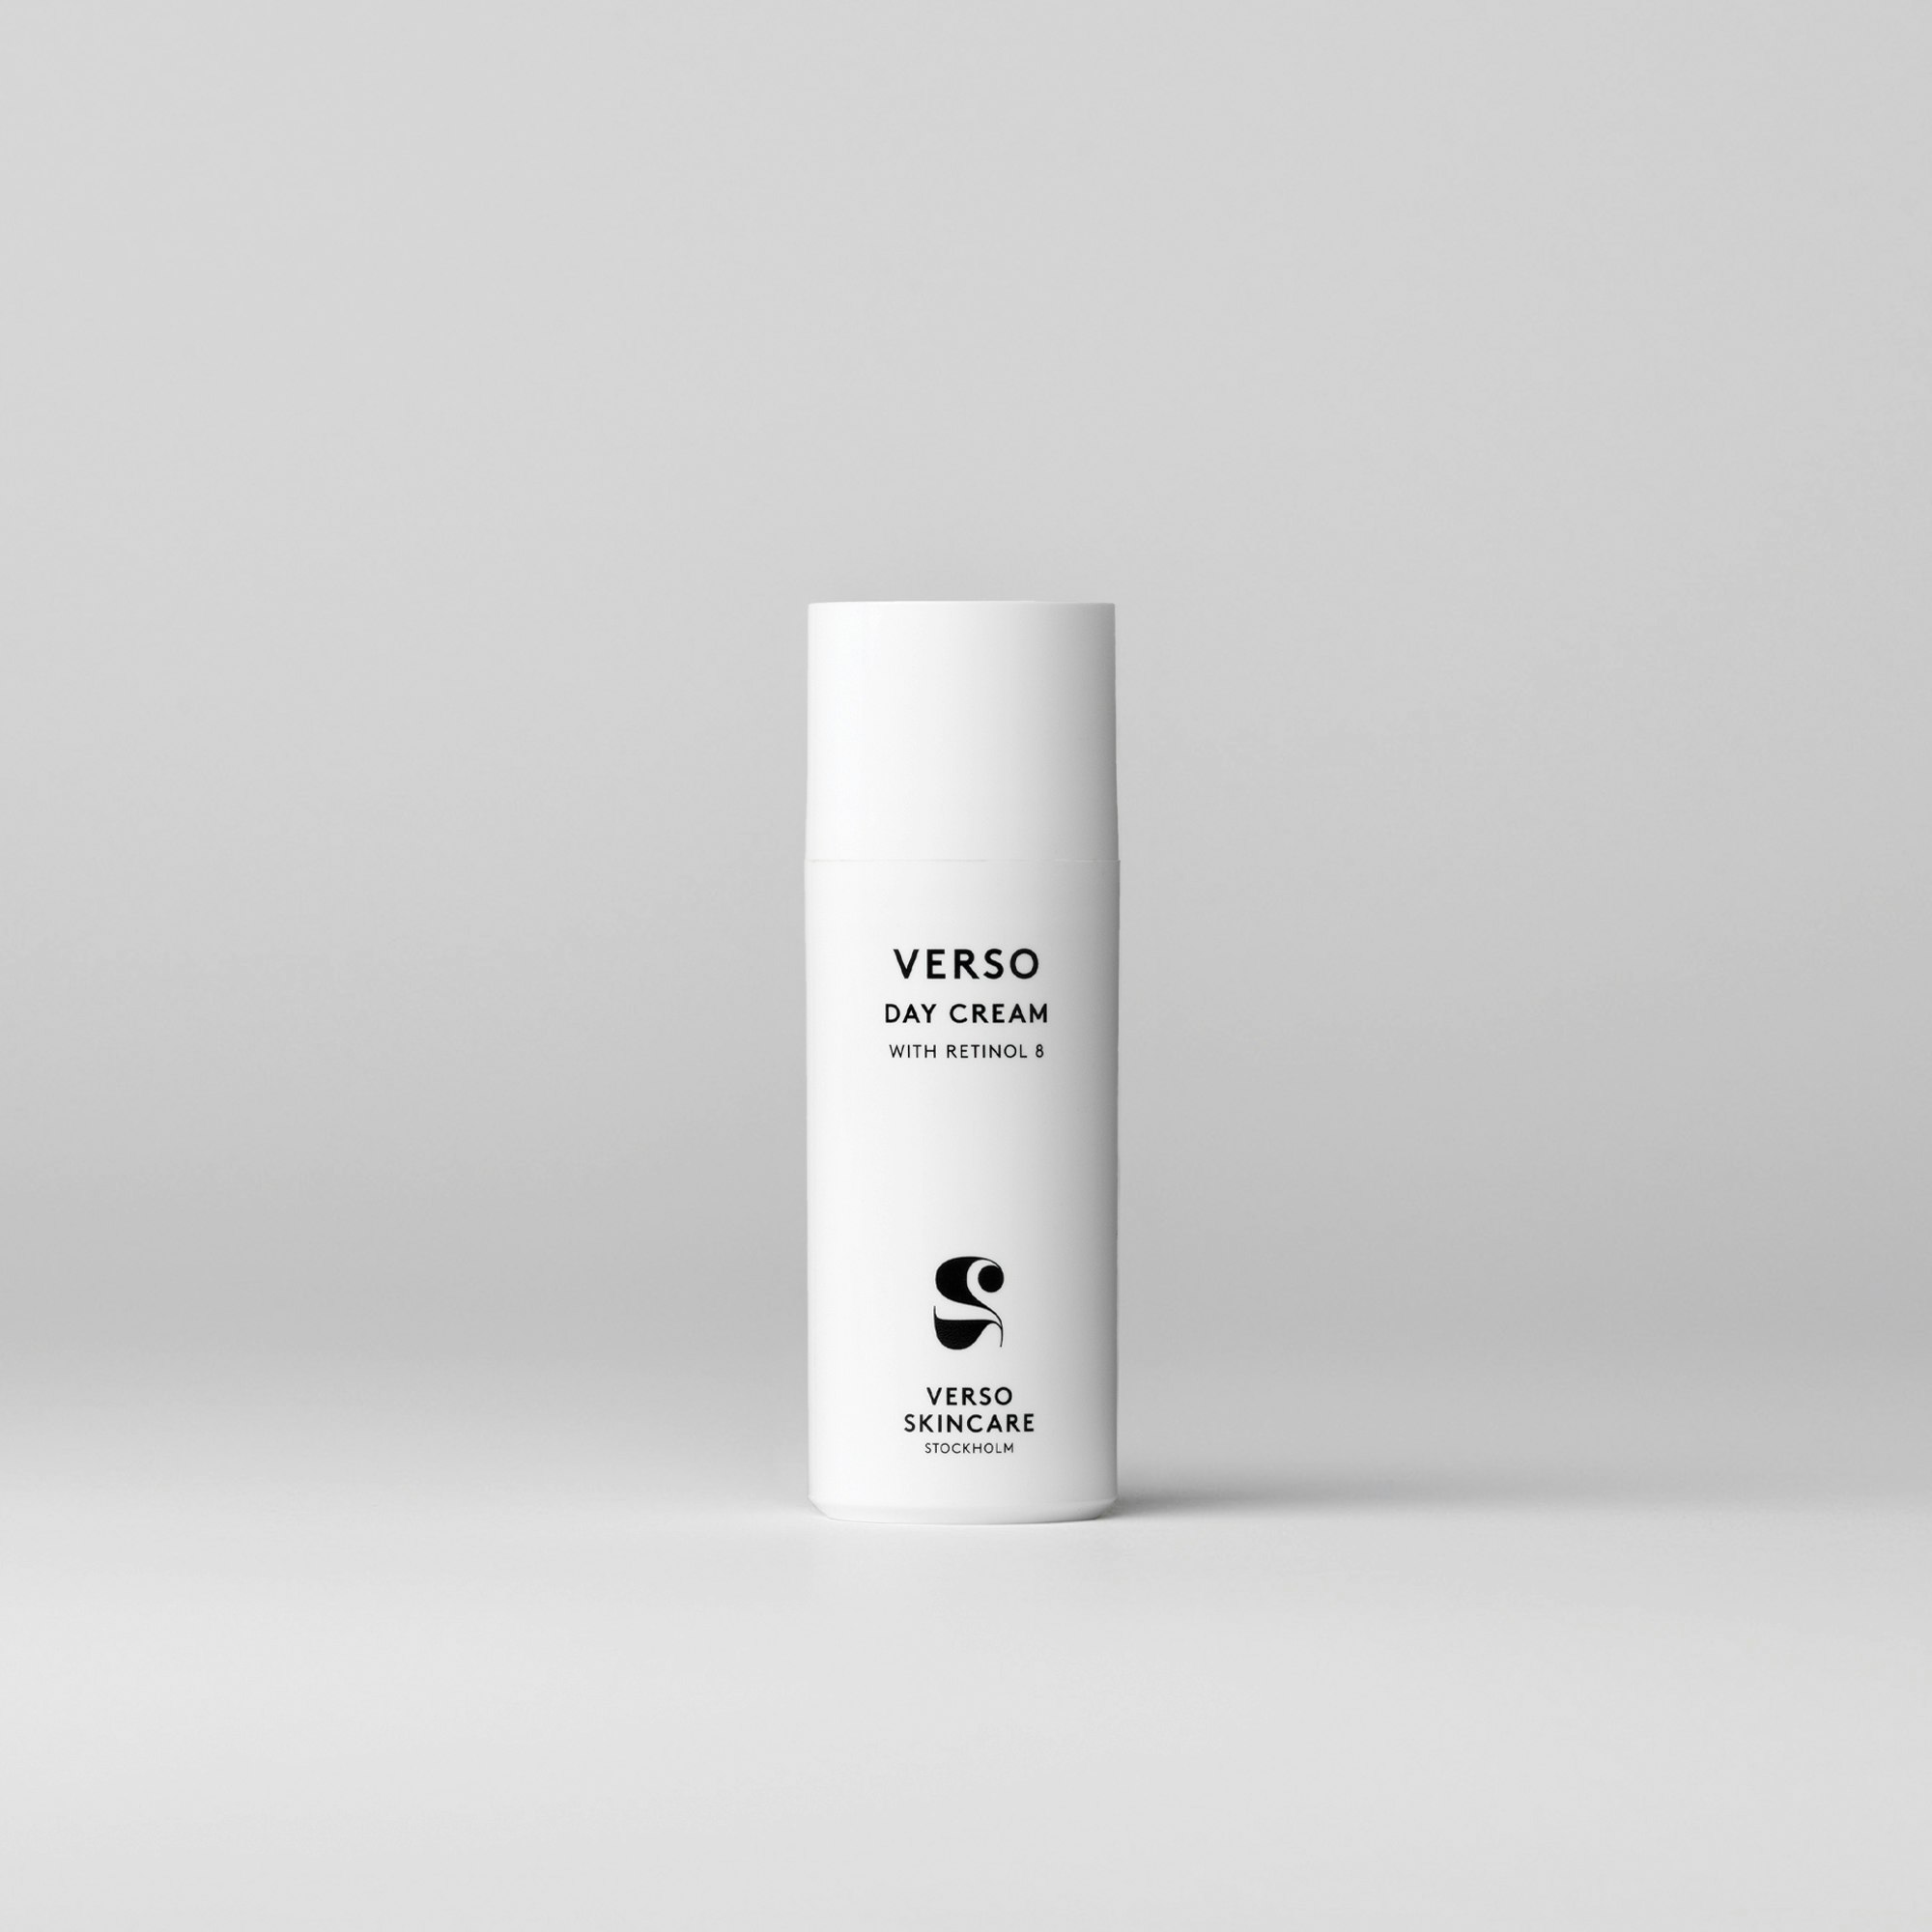 Verso Morning Routine (value 280 USD)